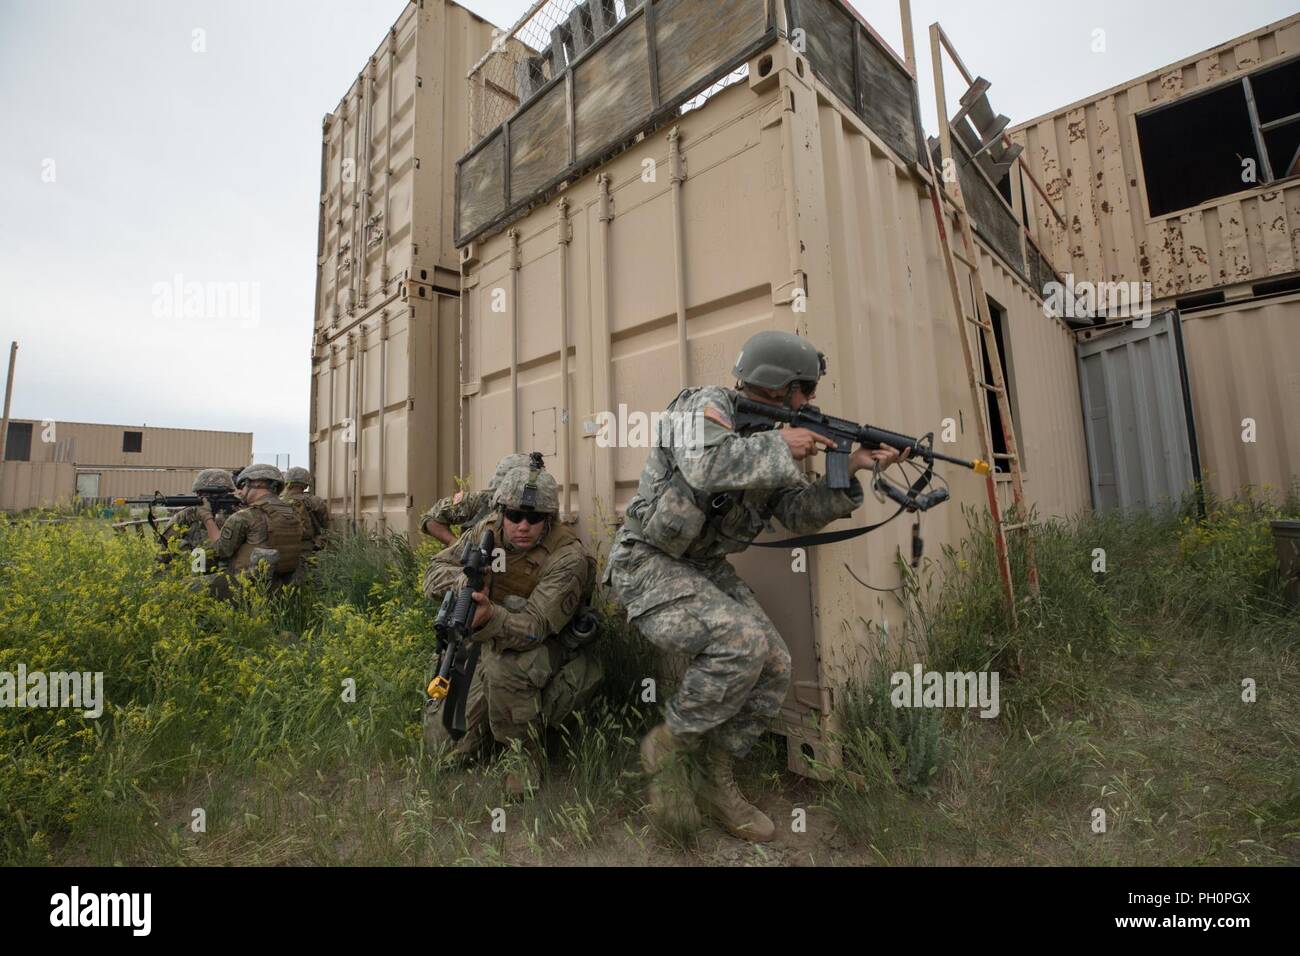 U.S. Soldiers with the 211th Engineer Company (Mobility and Augmentation Company) of the South Dakota Army National Guard breach a door after detonating an explosive charge to assault a mock village in the North Training Area of Camp Guernsey, WY, on June 16, 2018. The Golden Coyote training exercise is a three-phase, scenario-driven exercise conducted in the Black Hills of South Dakota and Wyoming, which enables commanders to focus on mission essential task requirements, warrior tasks and battle drills. Stock Photo